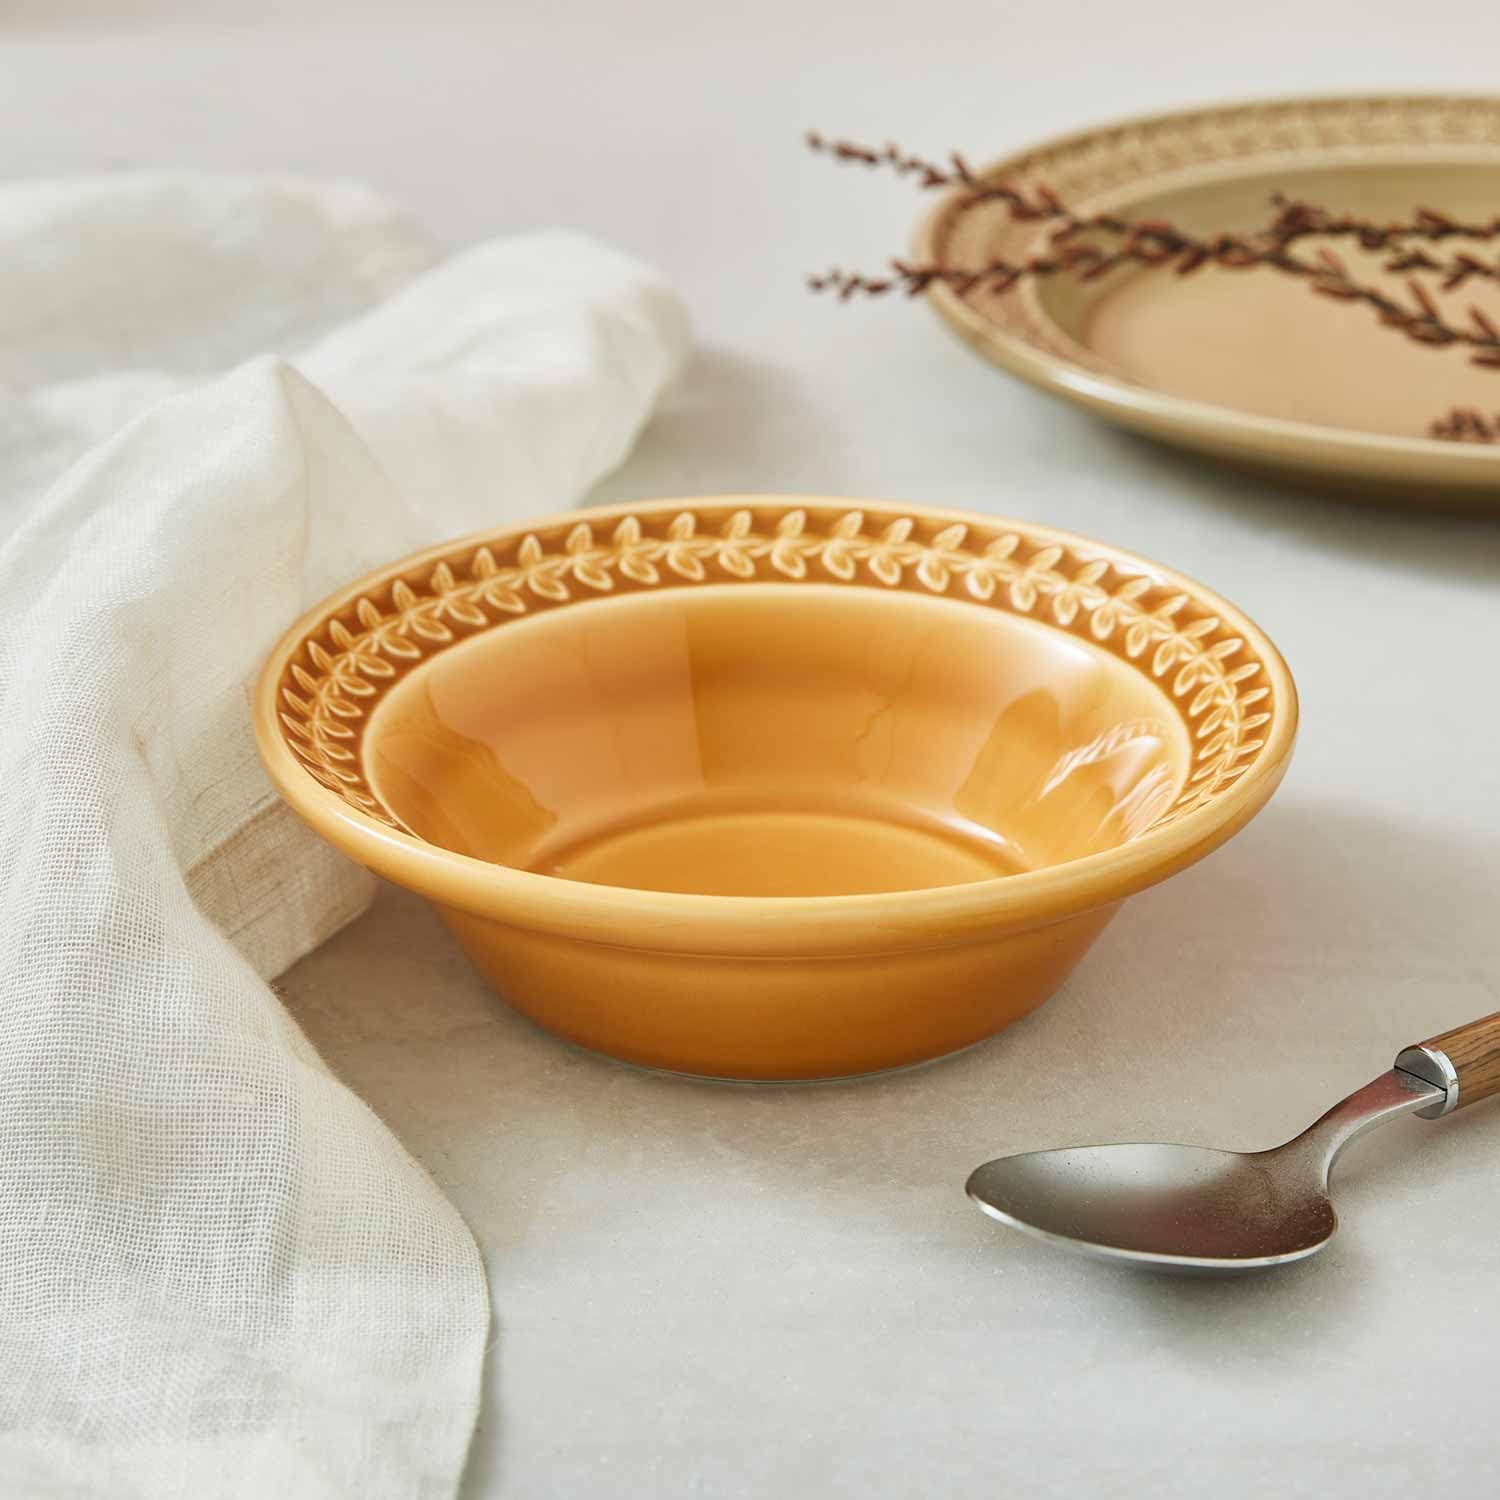 Portmeirion Botanic Garden Harmony Amber Cereal Bowl | 6 Inch Embossed Bowl for Cereal, Oatmeal, Fruit and Ice cream | Dishwasher, Microwave, and Oven Safe | Made in England